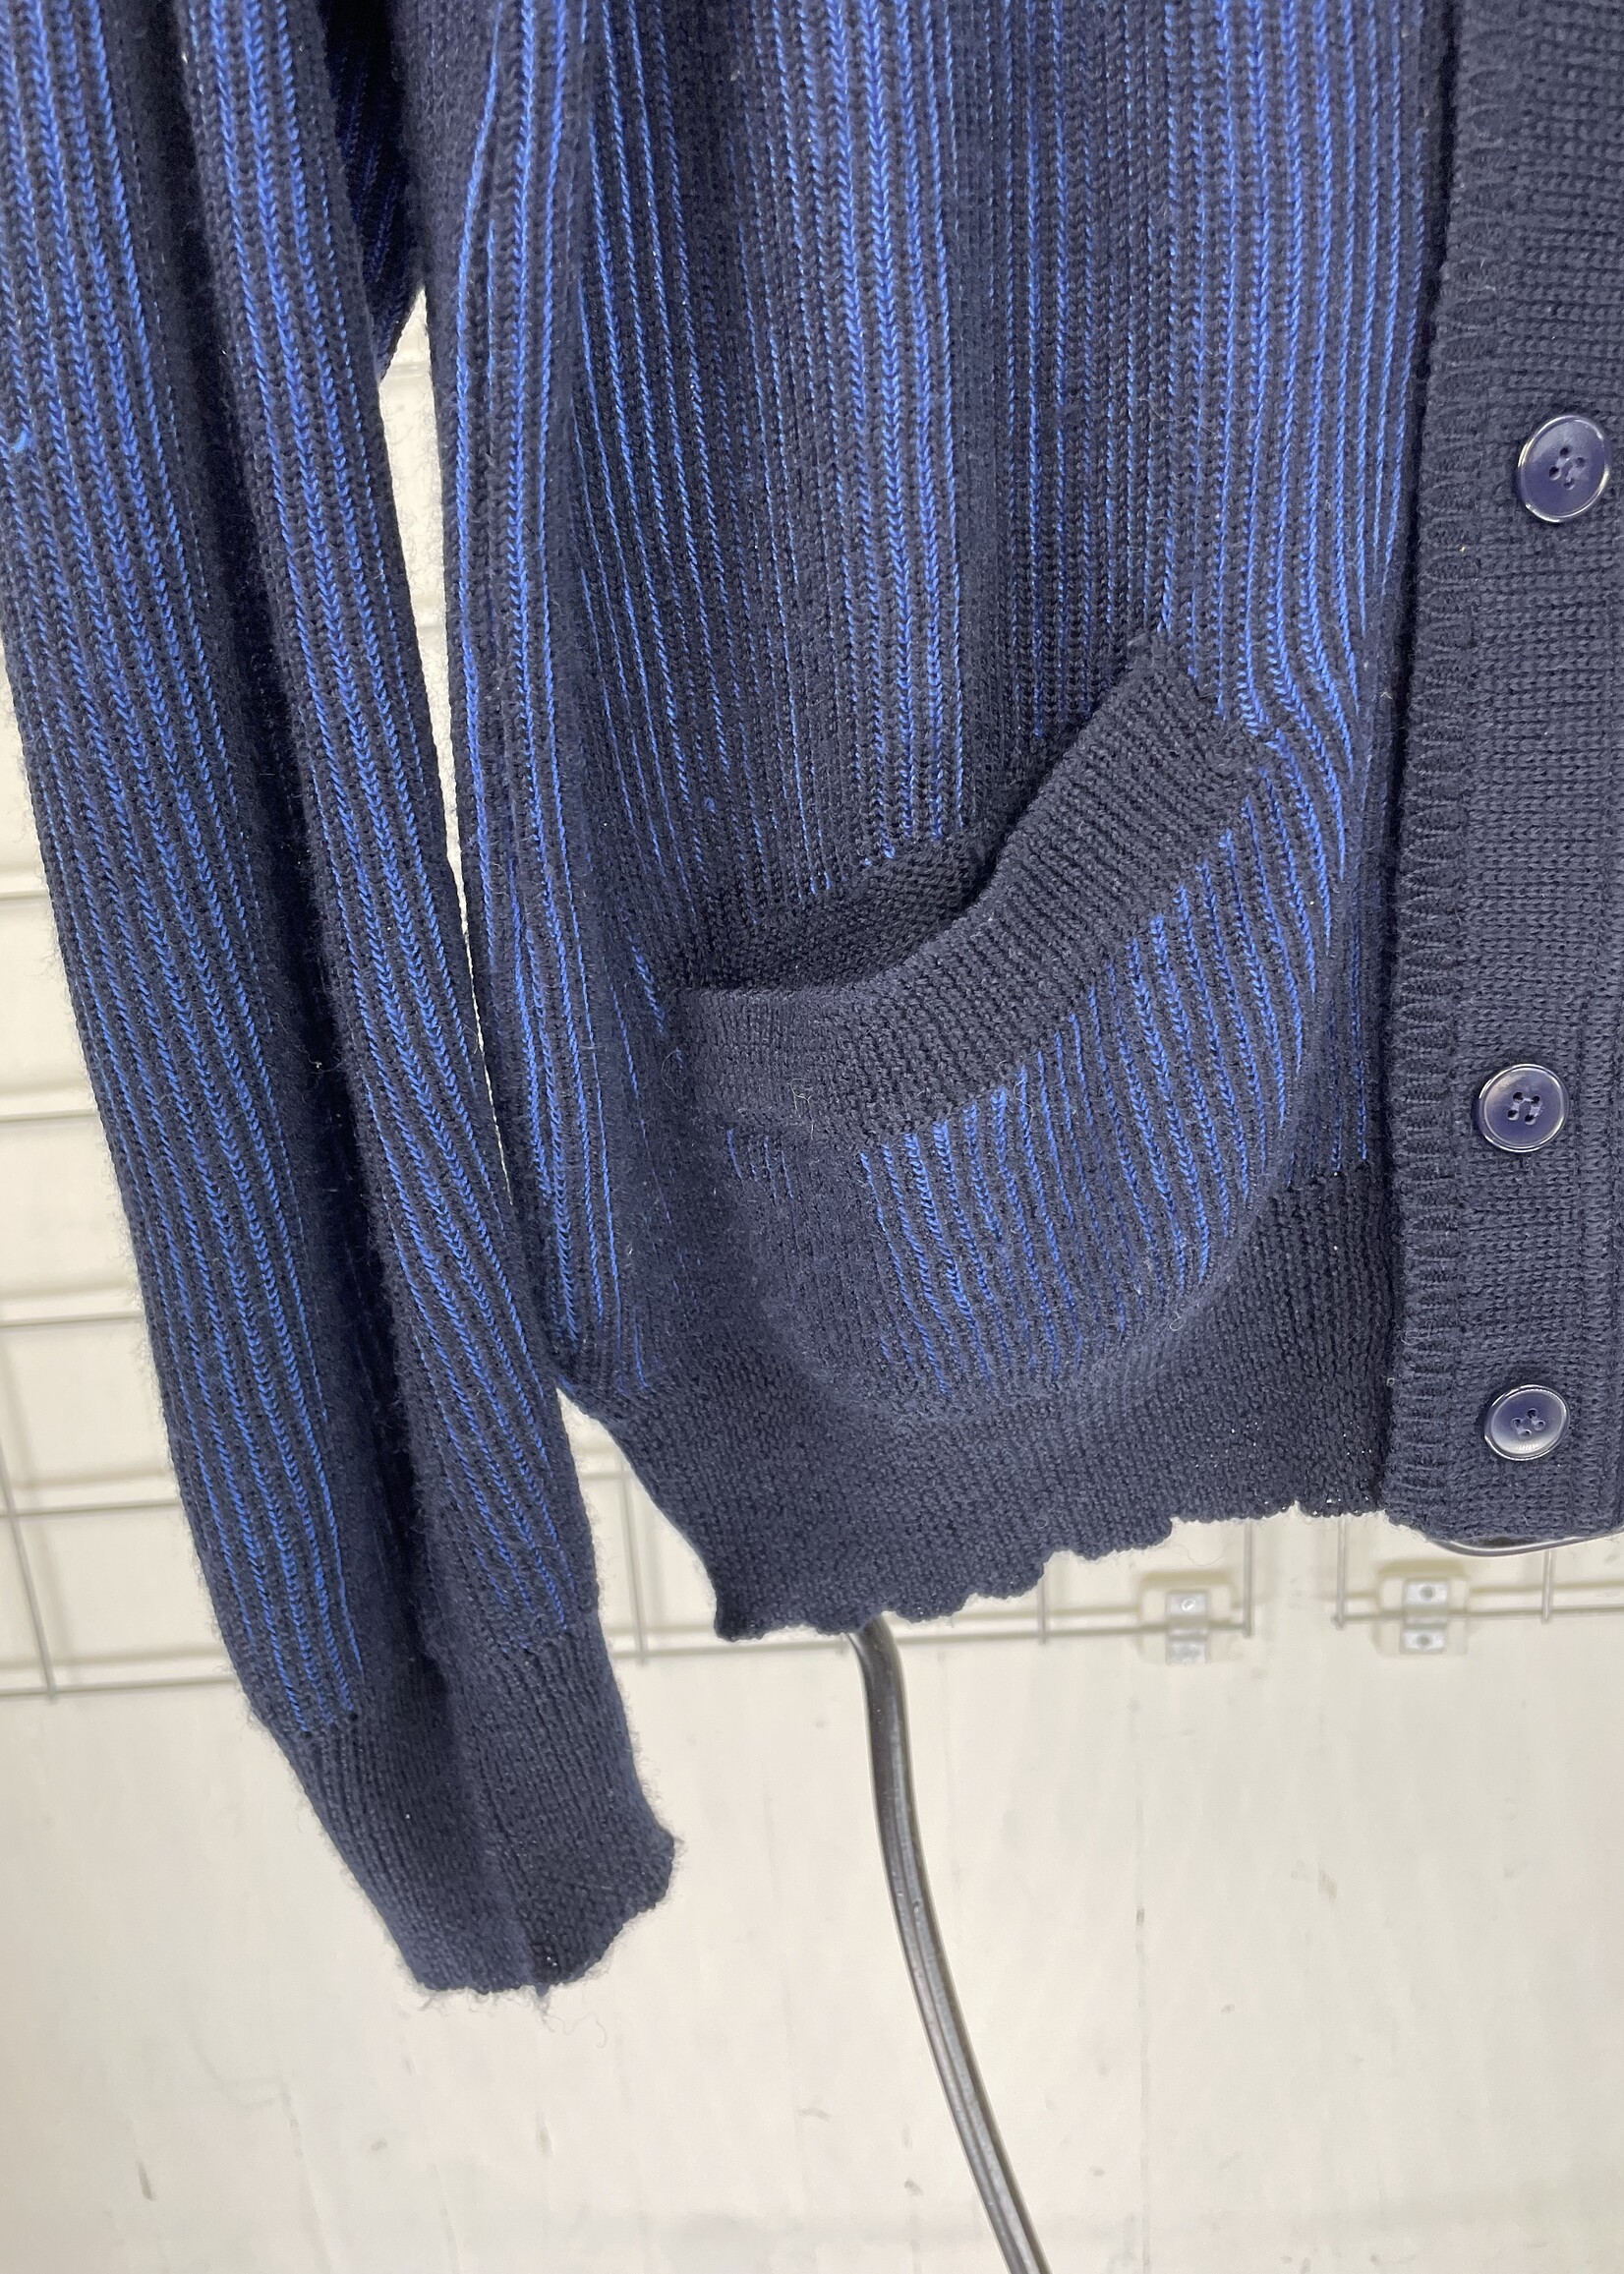 Yves Saint Laurent 80s blue knitted cardigan